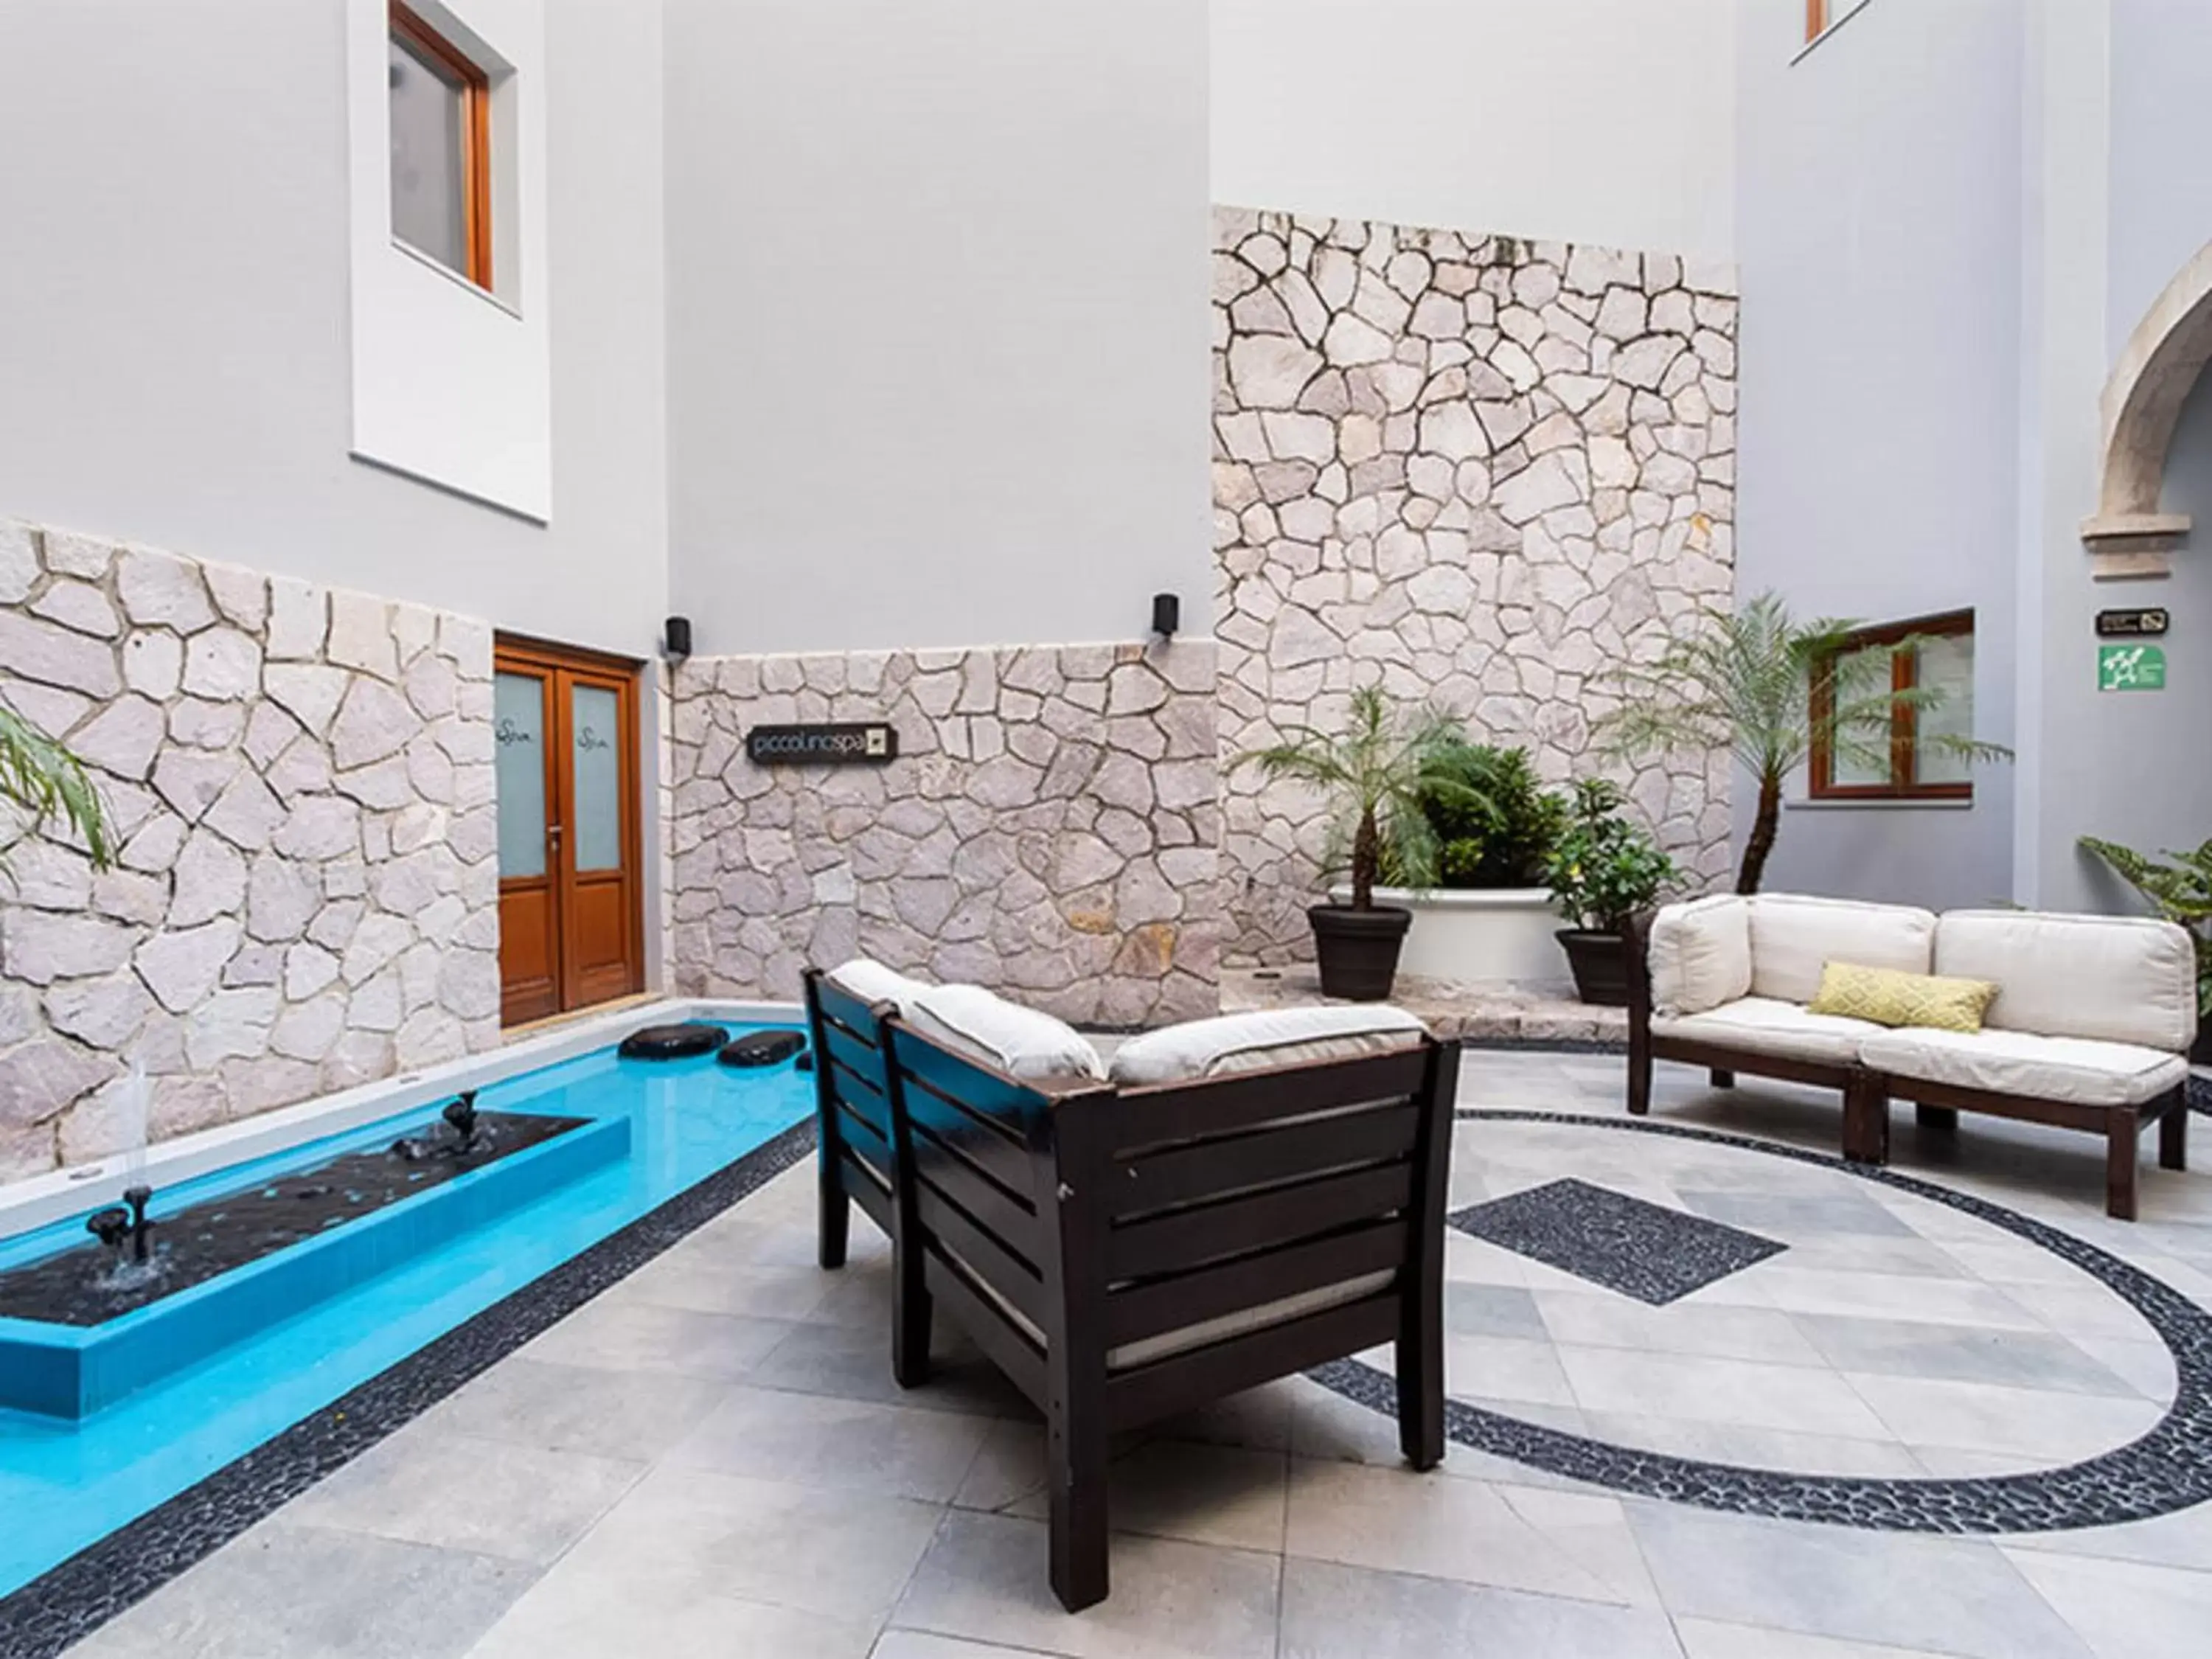 Property building, Swimming Pool in Casa Lucila Hotel Boutique